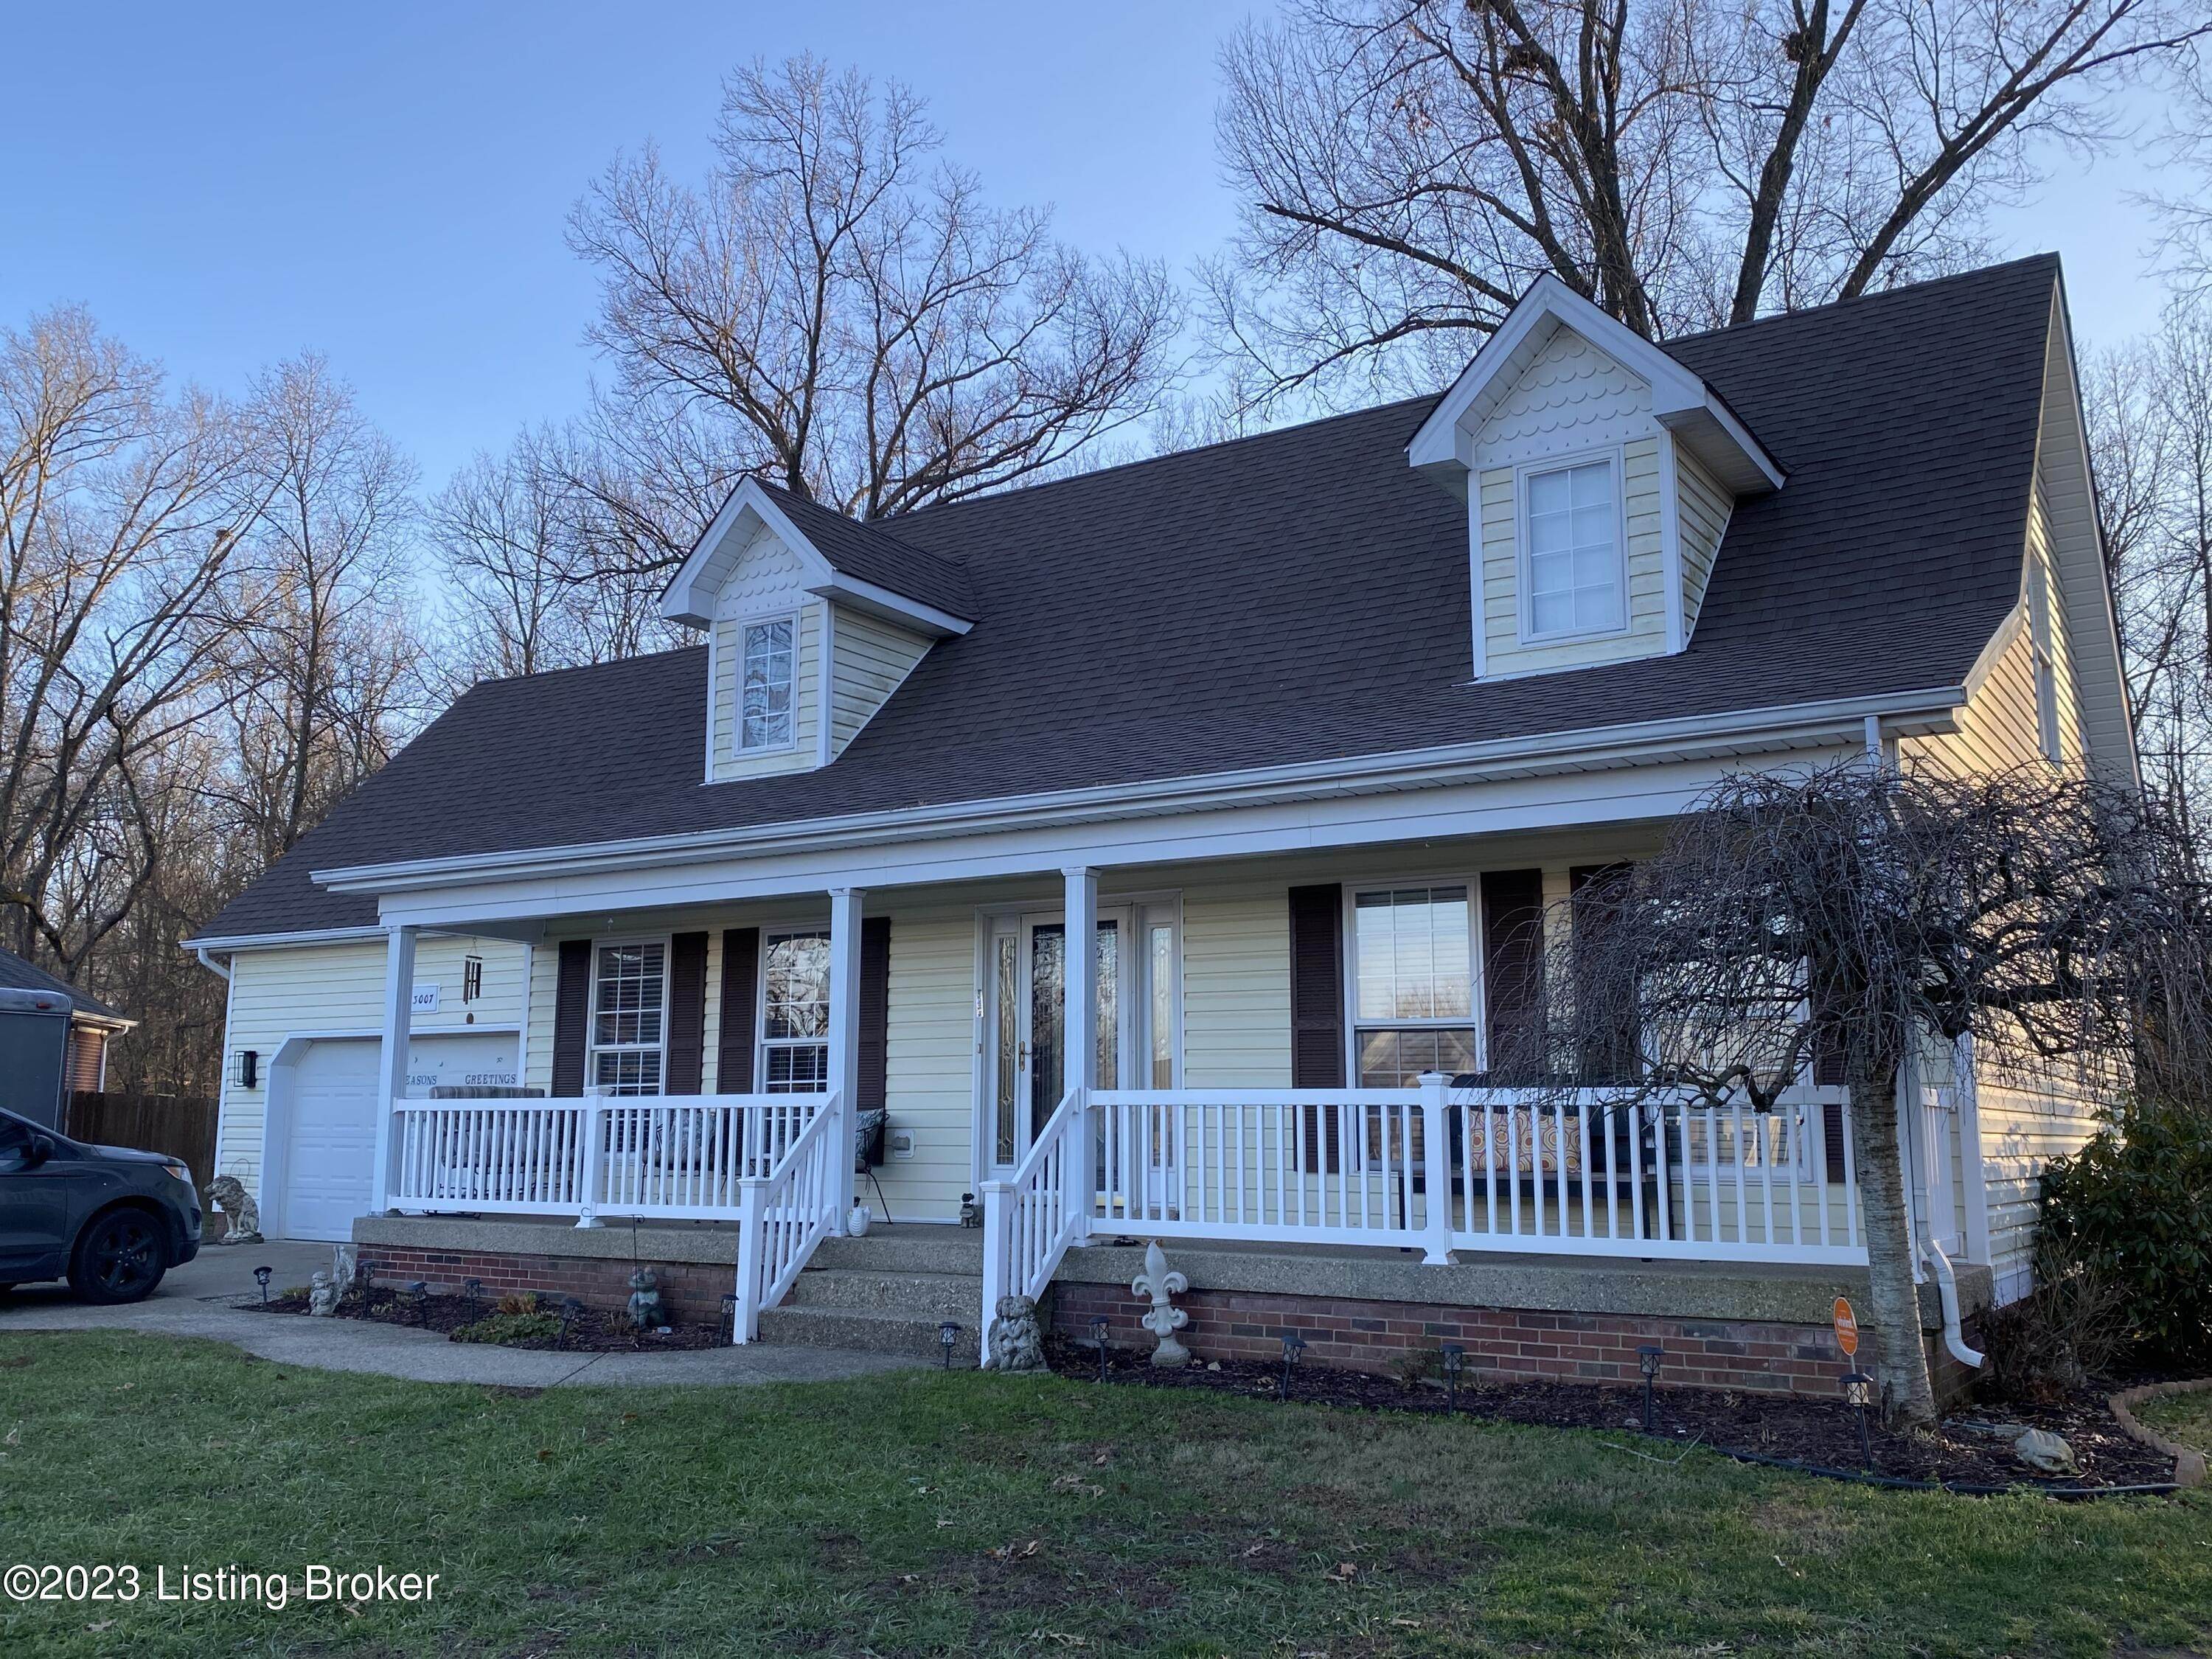 44. Single Family at Louisville, KY 40272